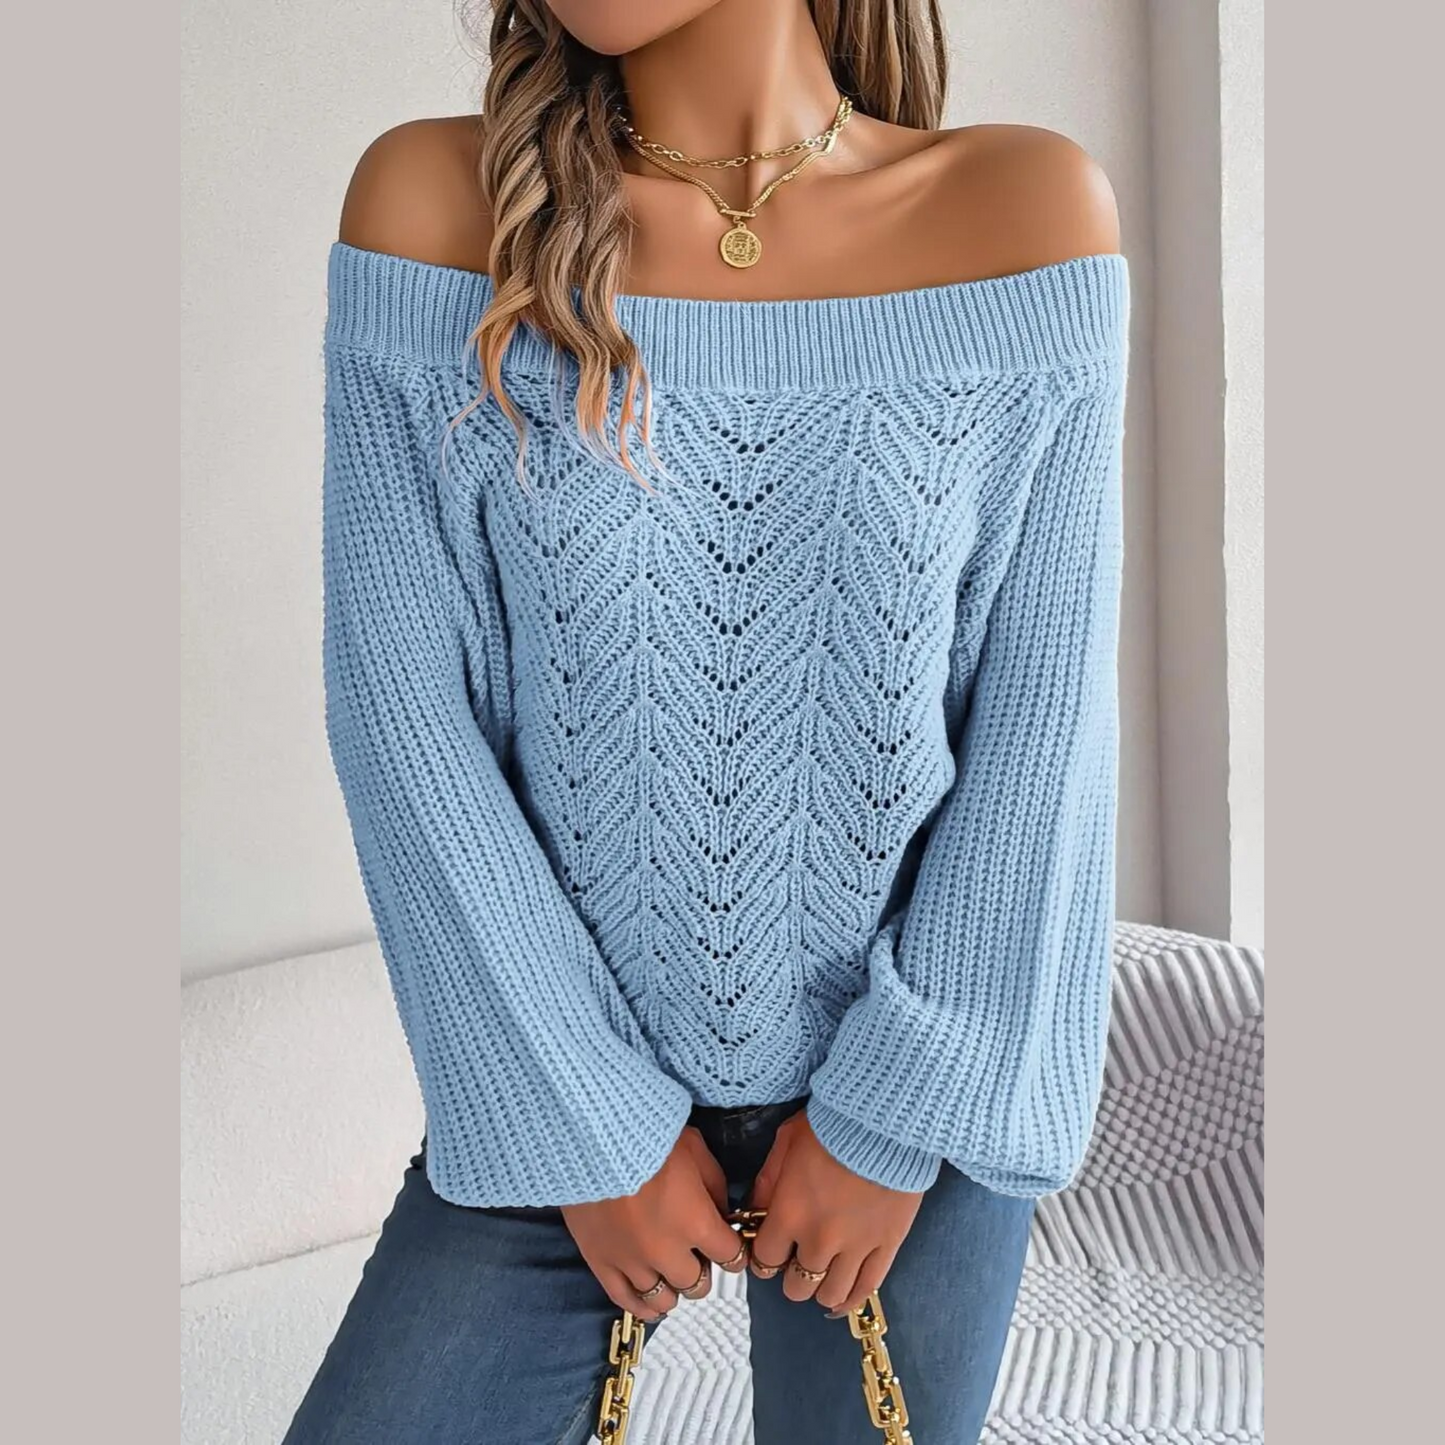 Loni - Blue Knitted Off The Shoulder Sweater Top